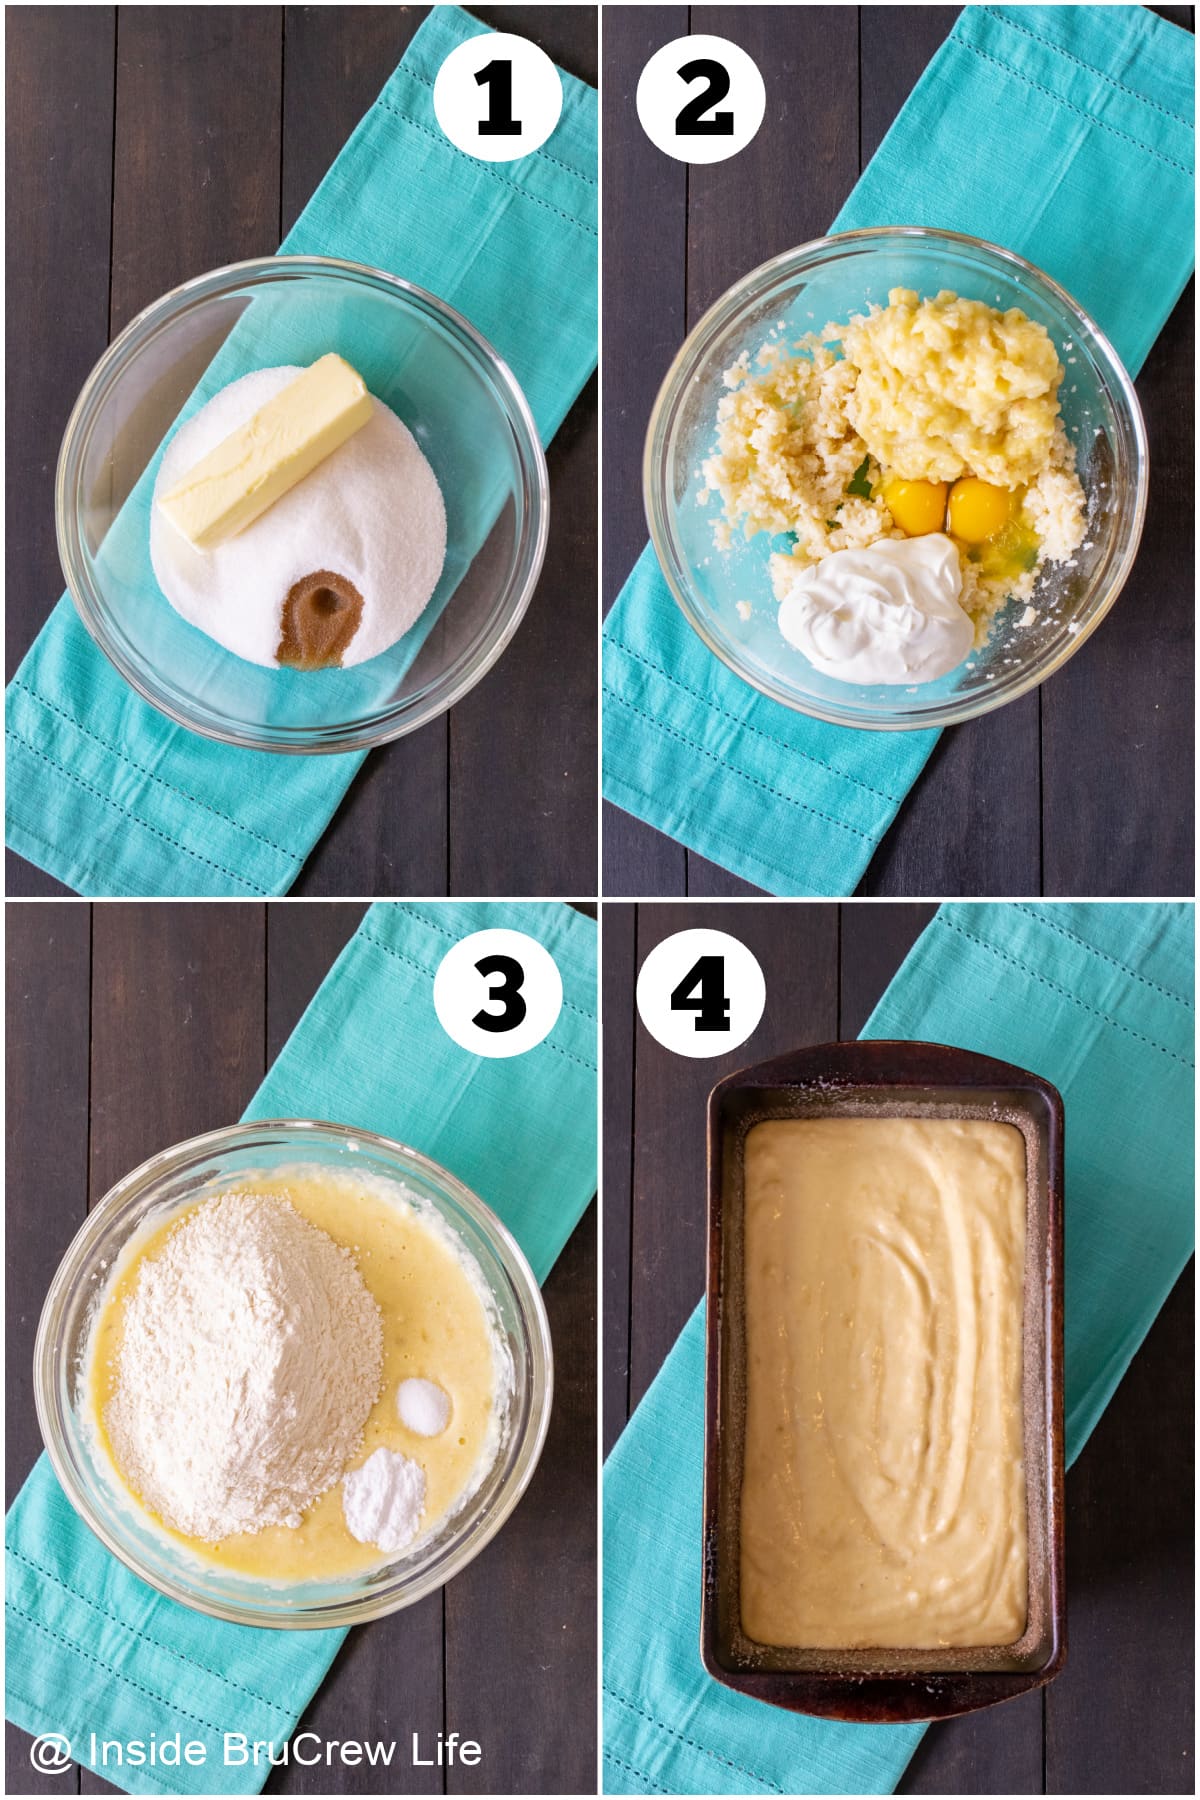 Four pictures collaged together showing how to make banana bread.